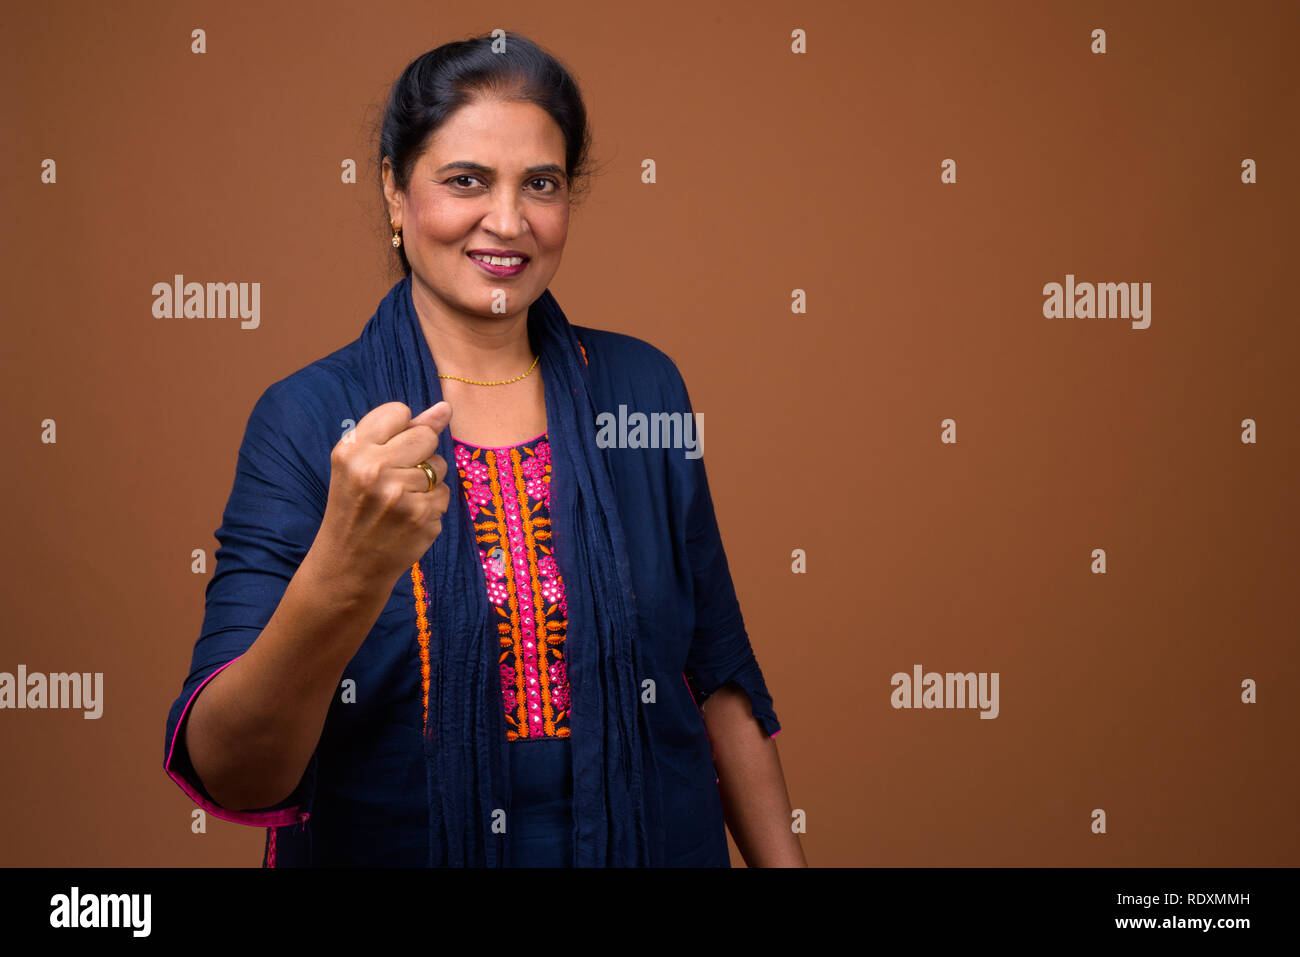 Mature beautiful Indian woman smiling with arm raised Stock Photo